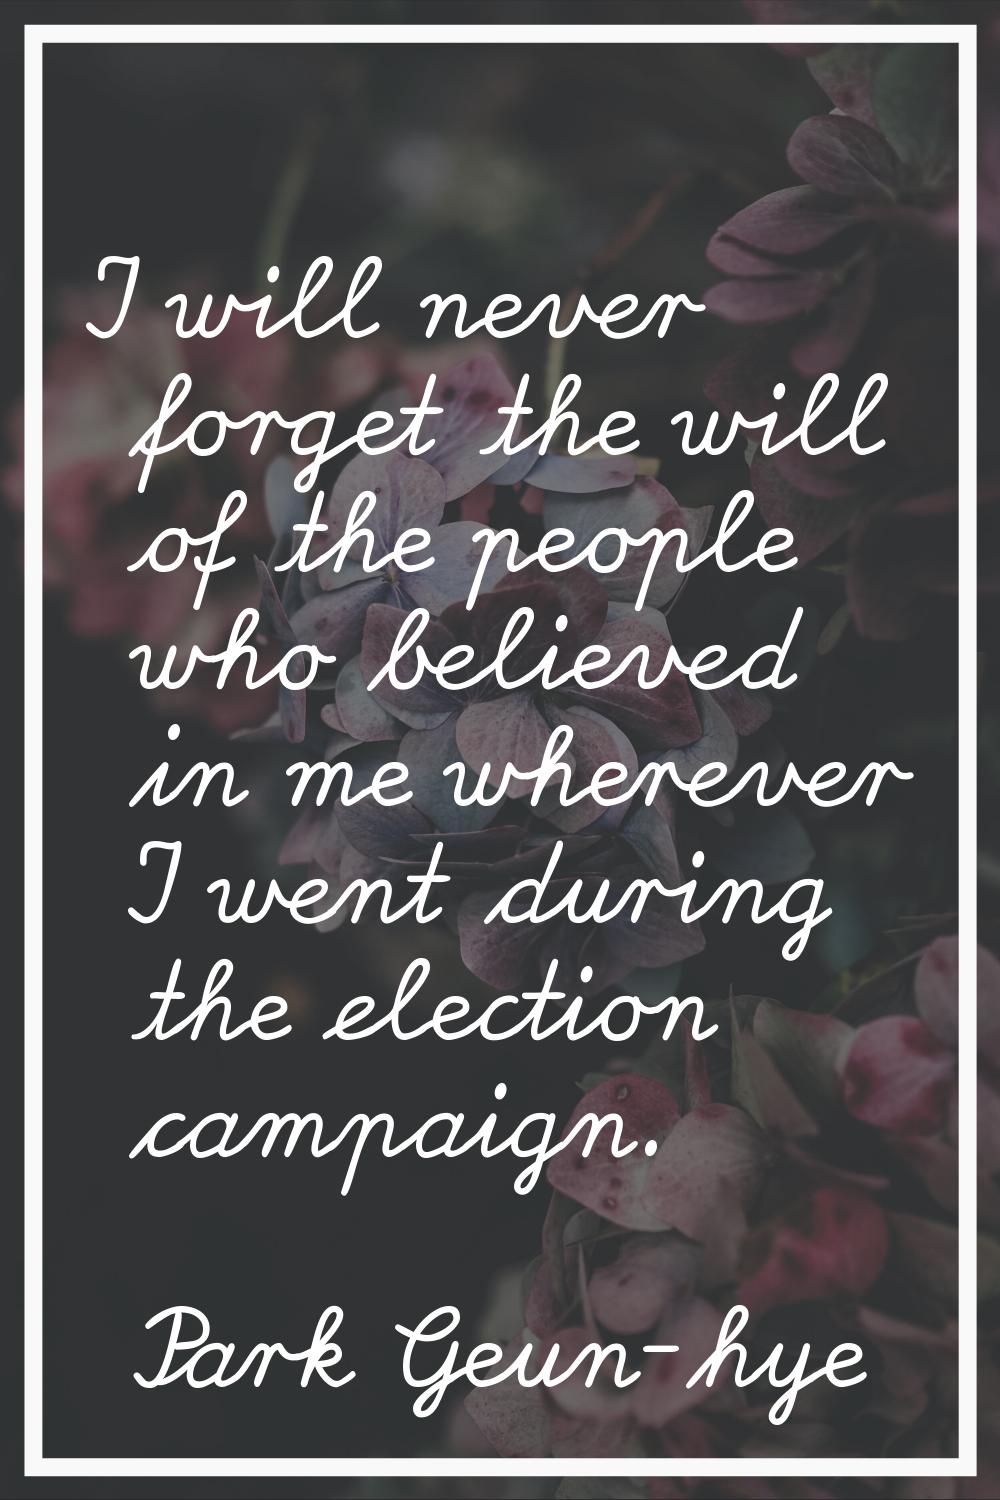 I will never forget the will of the people who believed in me wherever I went during the election c